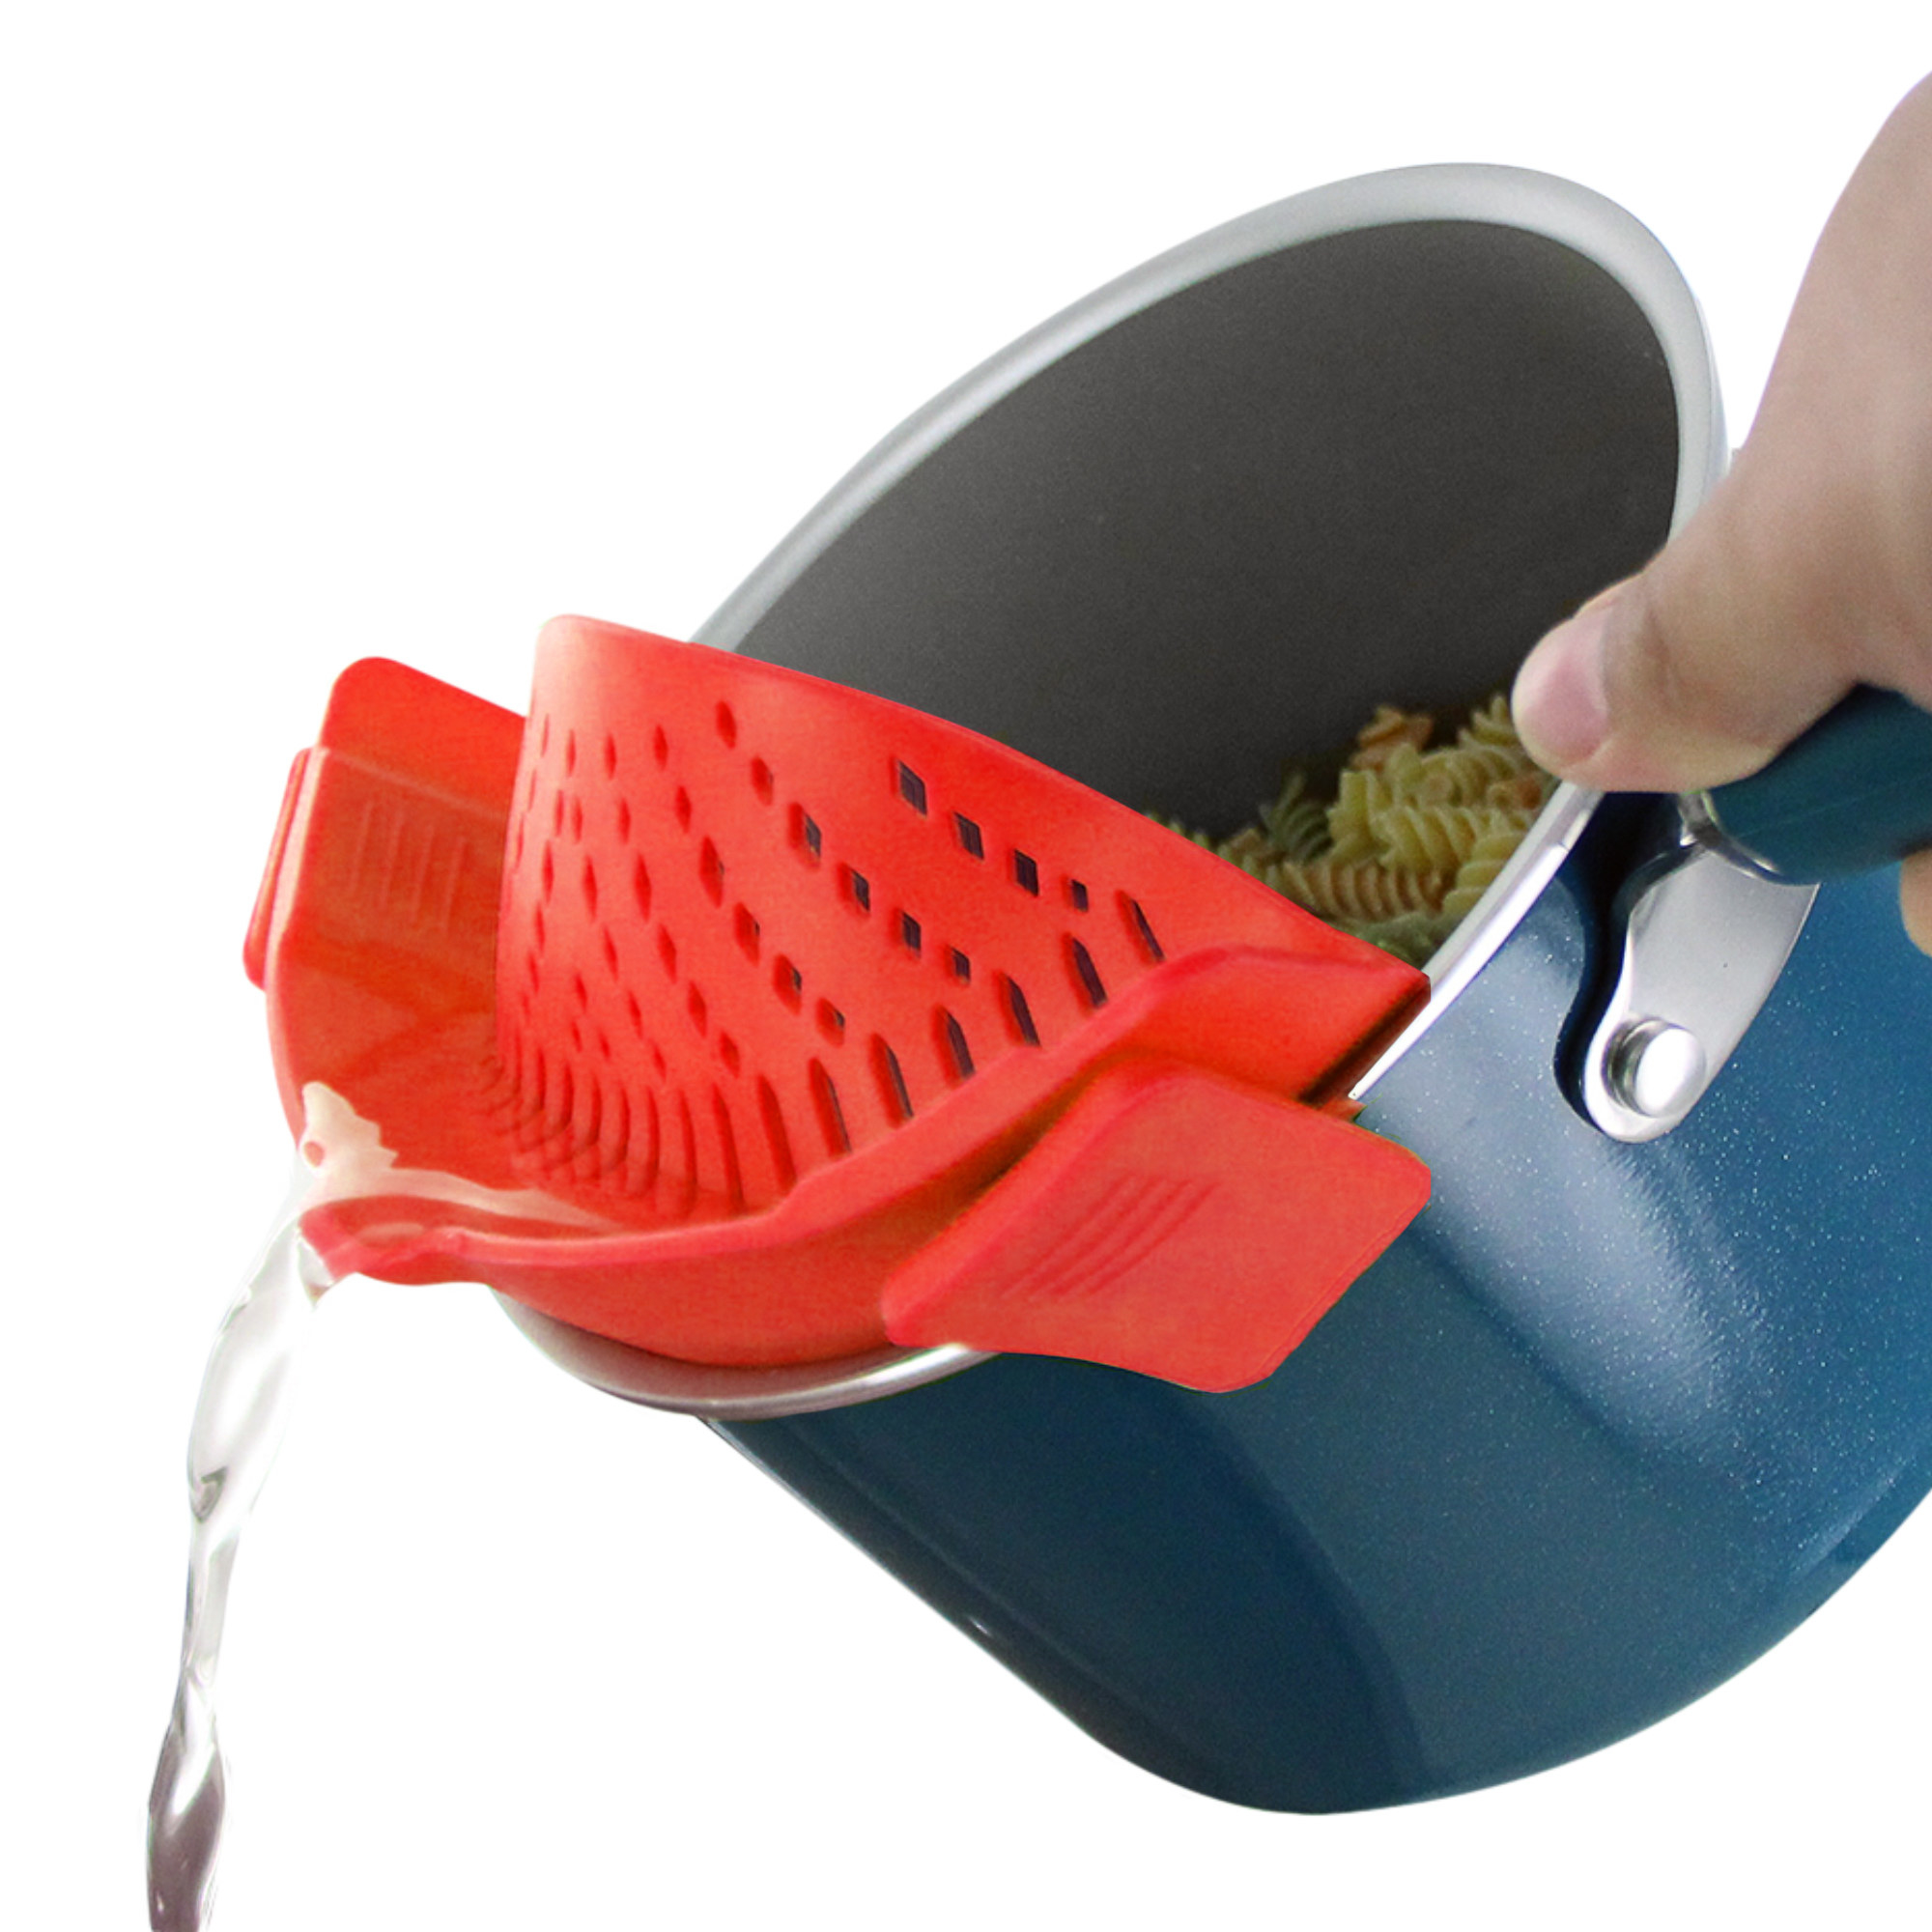 water draining from a pot through the clip on strainer in red